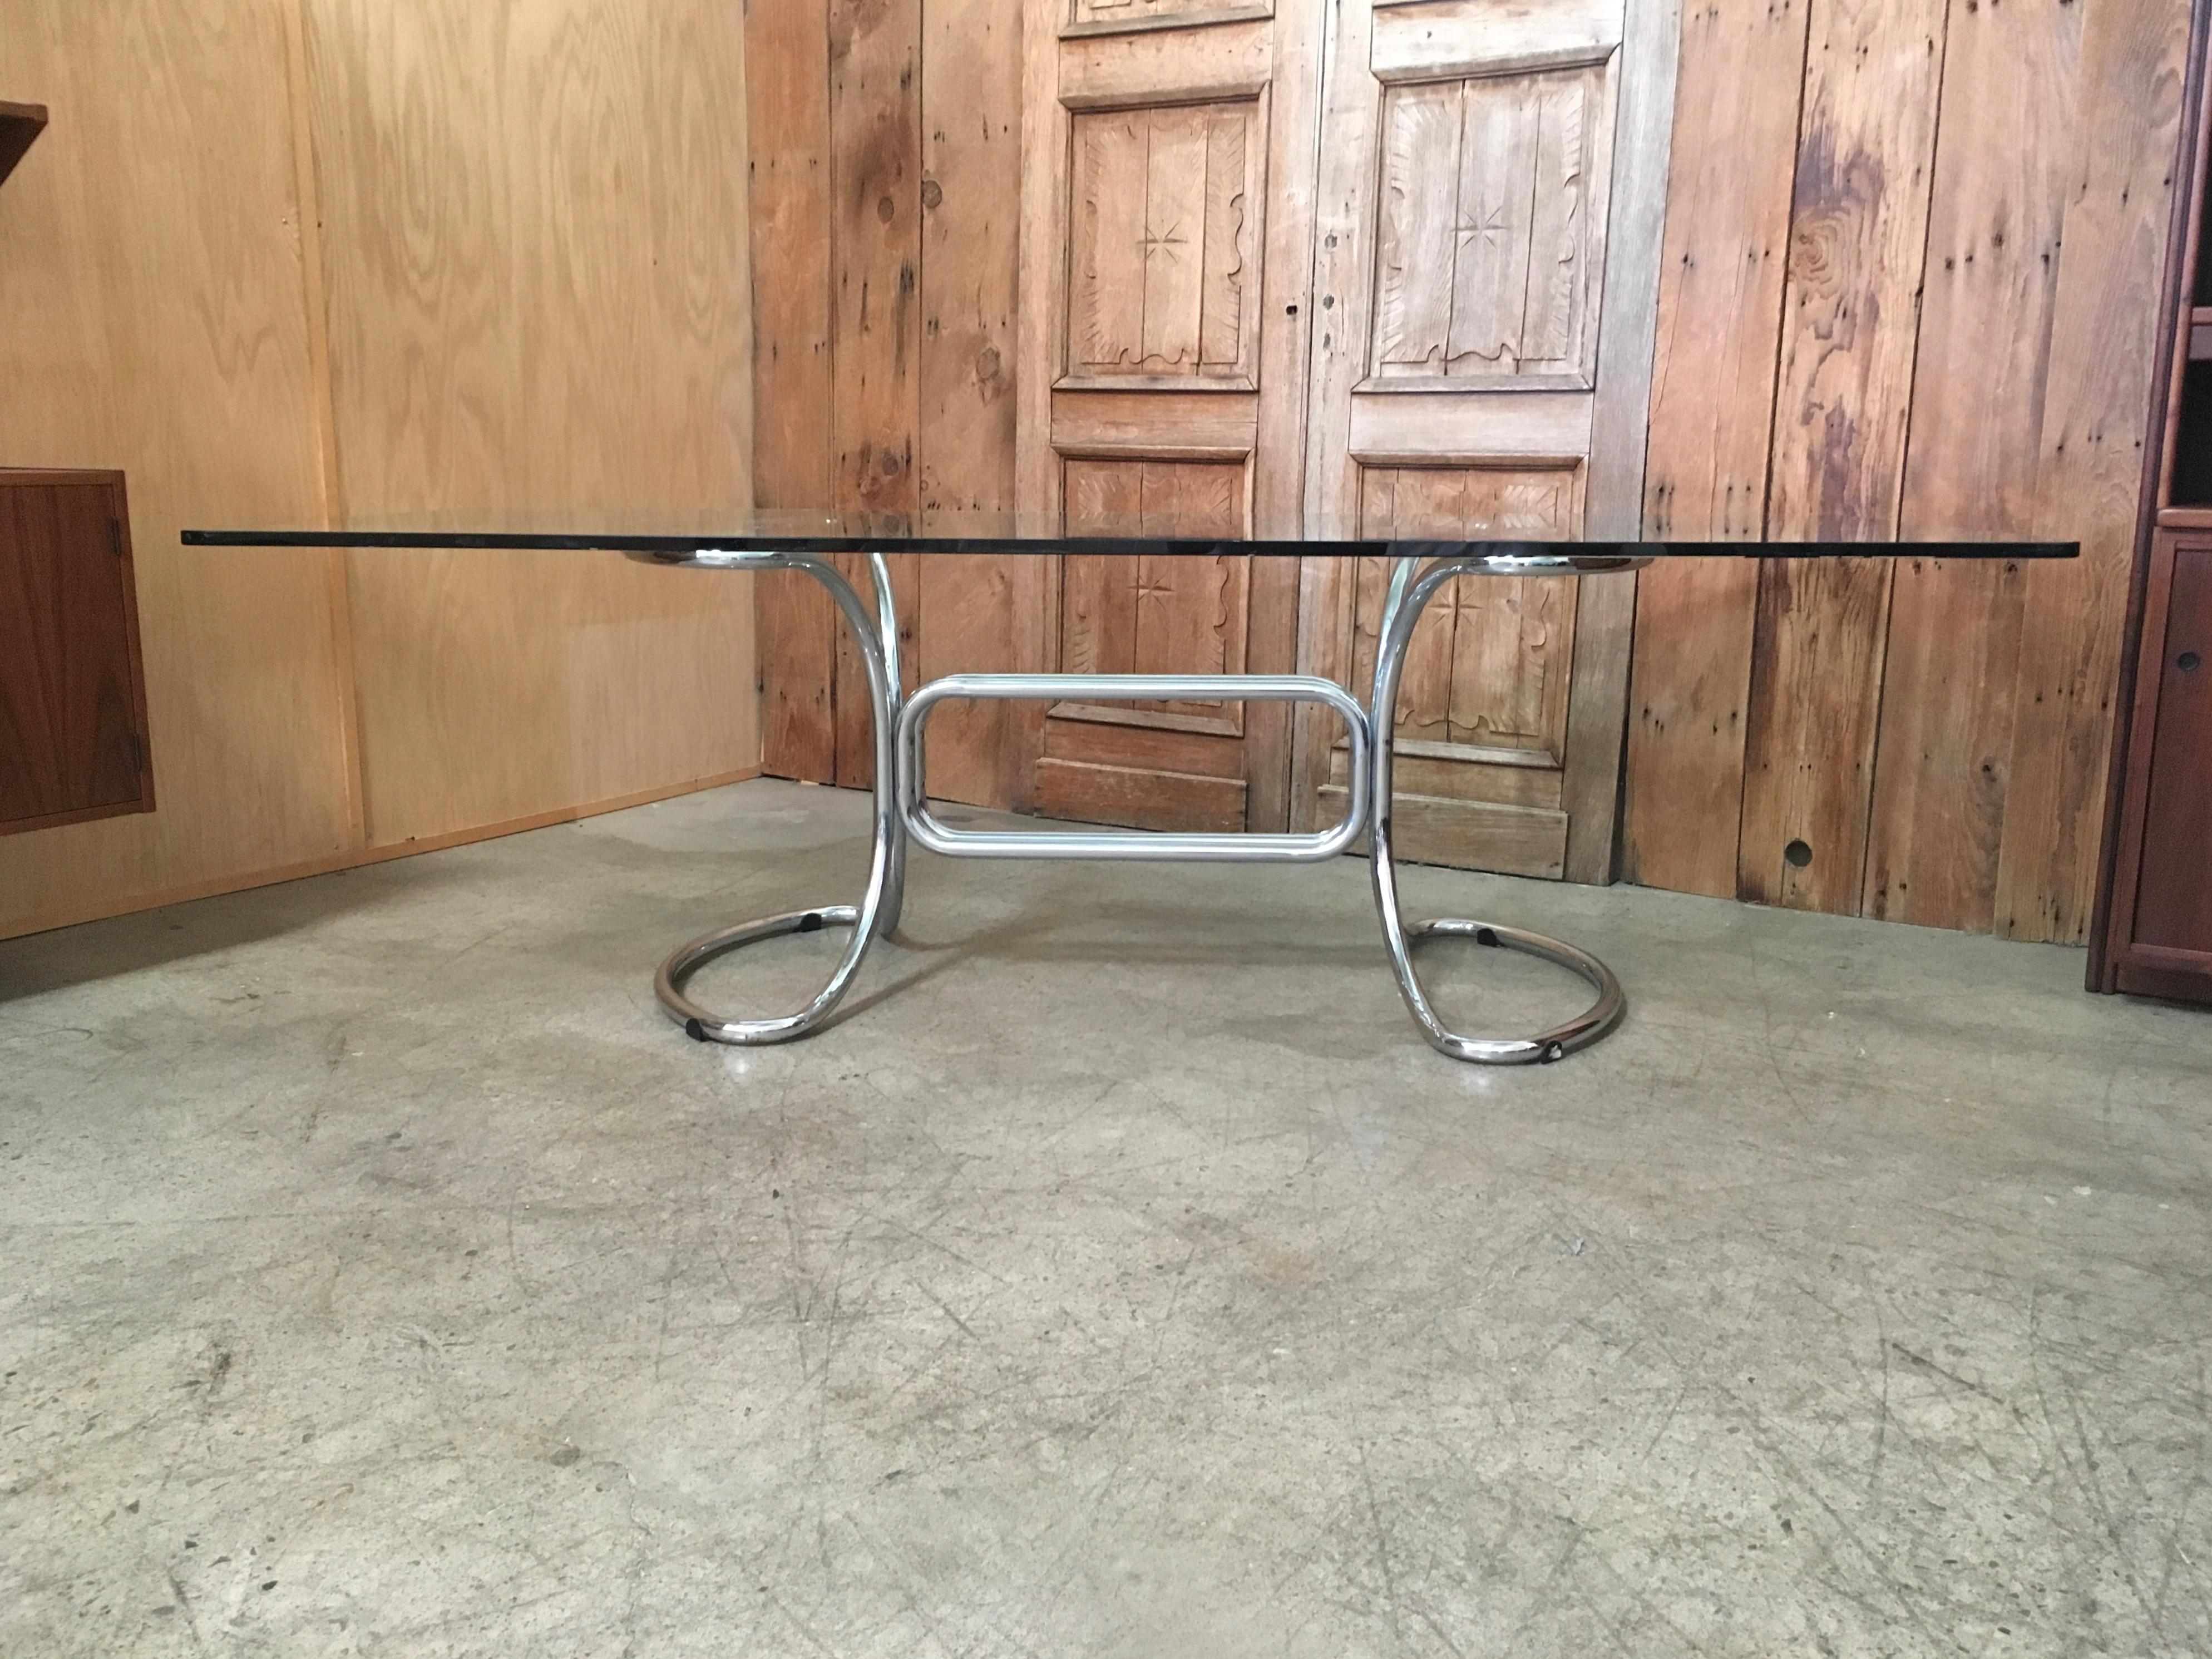 Glass and Steel Tube Dining Table by Giotto Stoppino, Italy, 1970s (20. Jahrhundert)